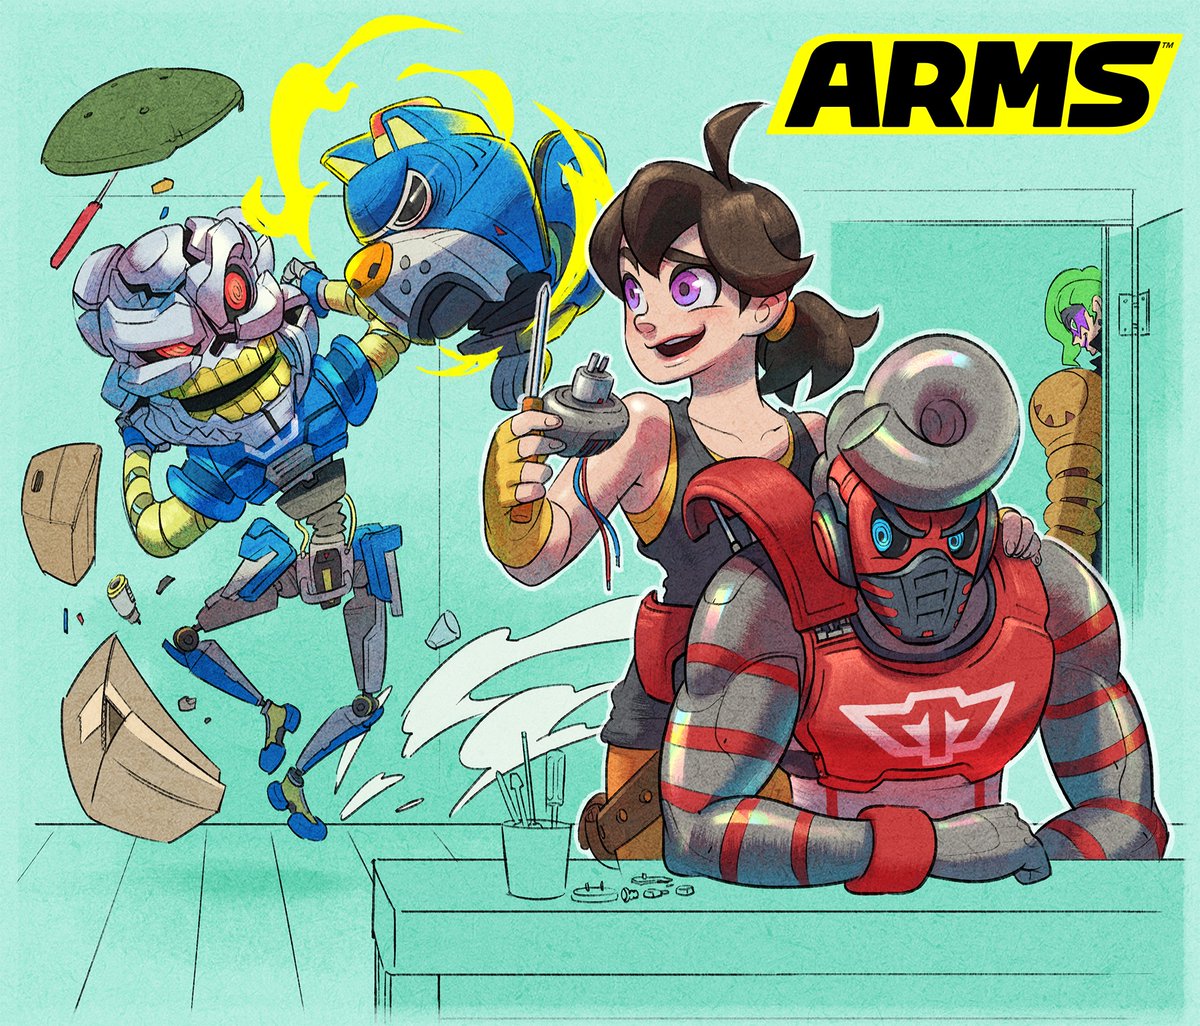 arms 2 switch release date